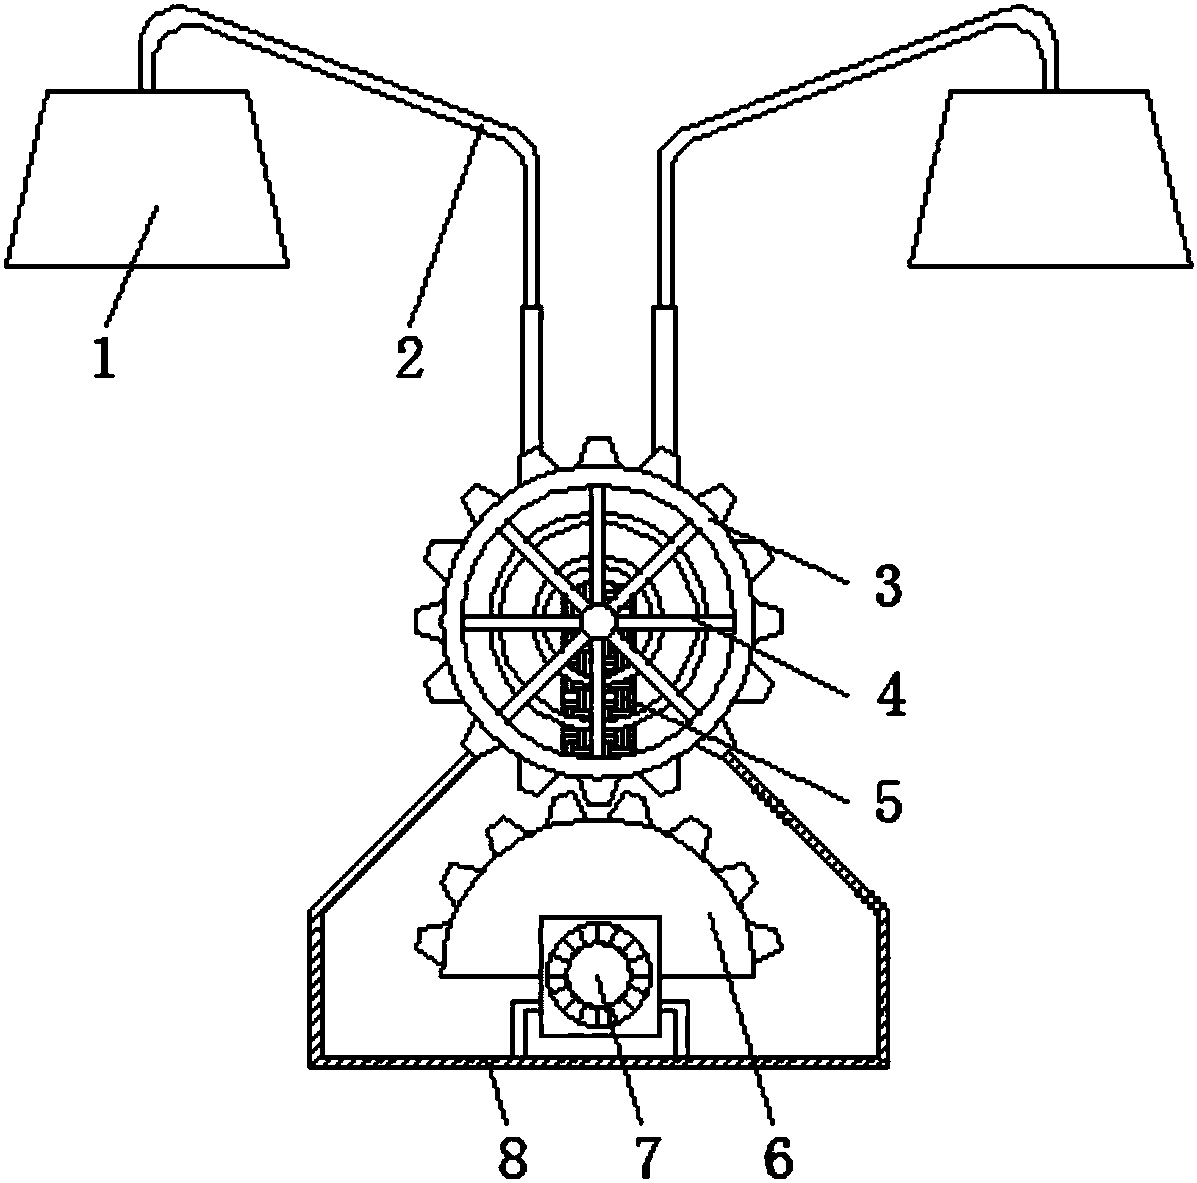 Architectural illumination decoration device with mosquito repellent function